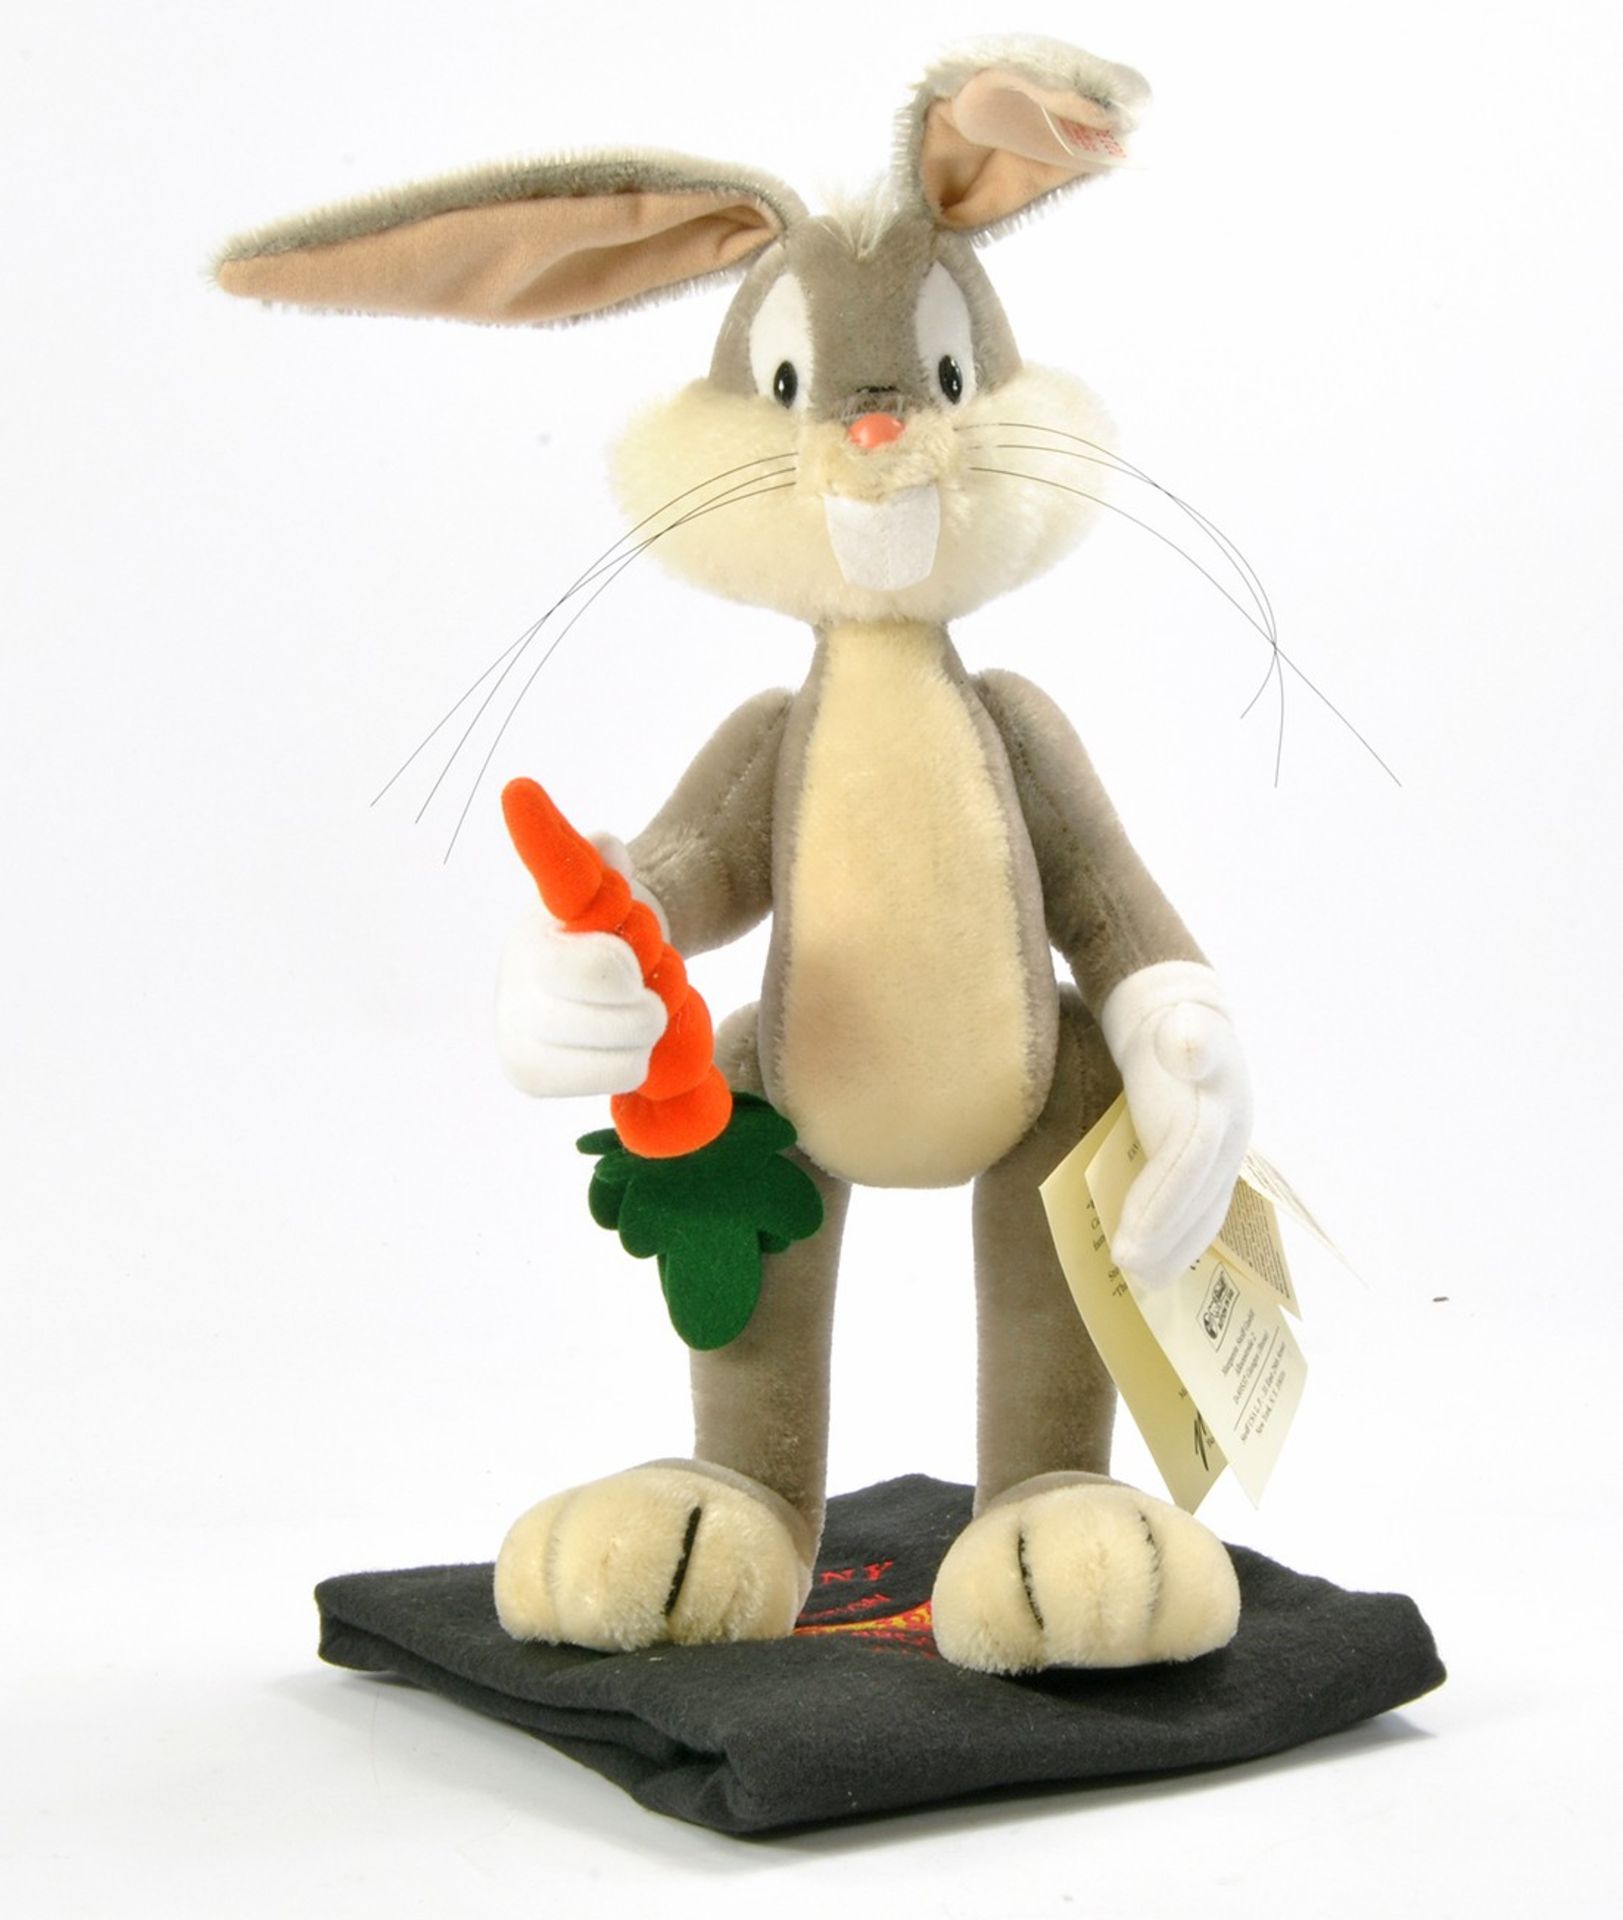 Steiff 1996 Limited Edition 32cm Bugs Bunny EAN 665189. 2130 of 2500. Complete with tags and